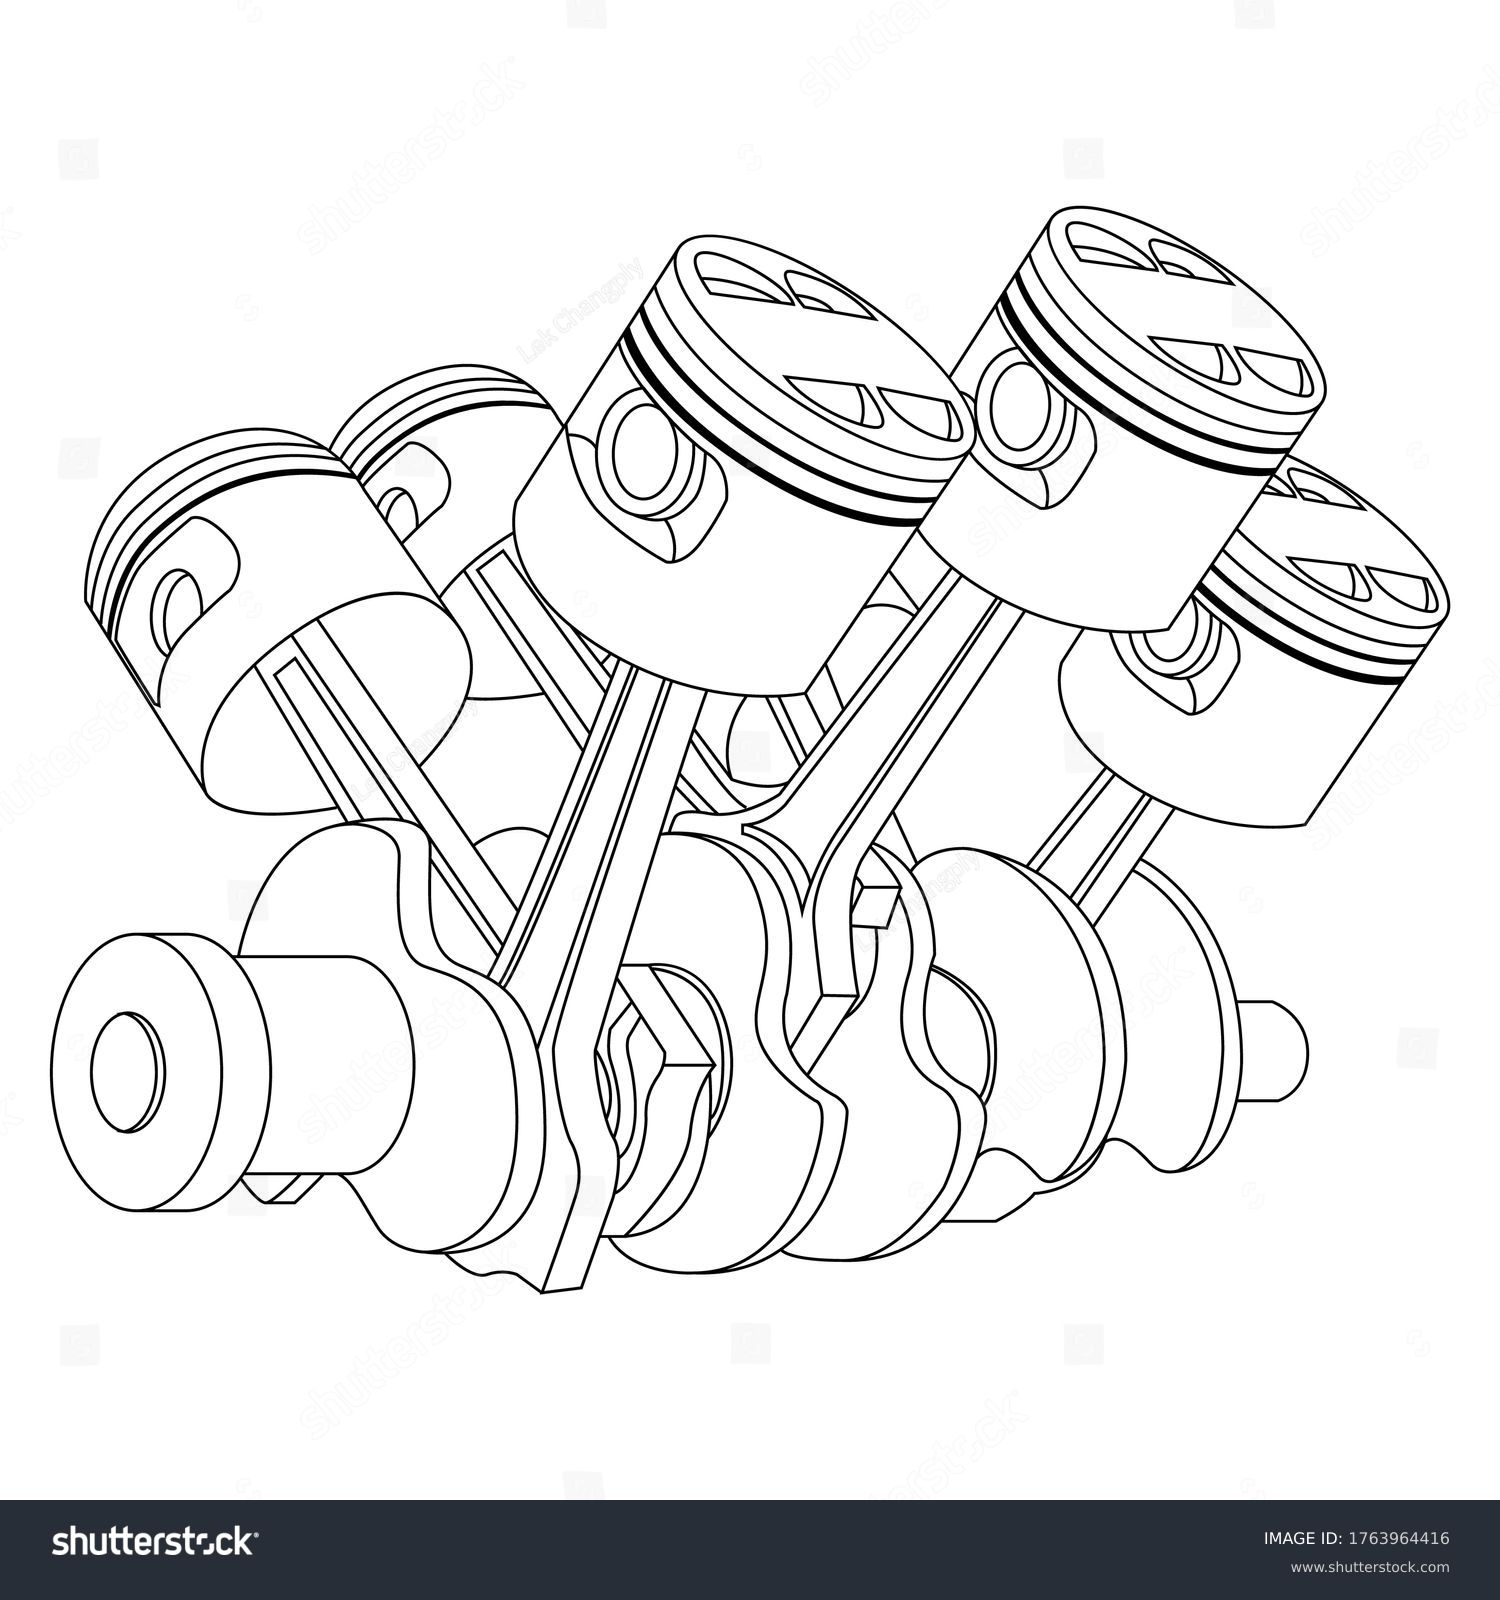 Piston technical drawing Images, Stock Photos & Vectors Shutterstock